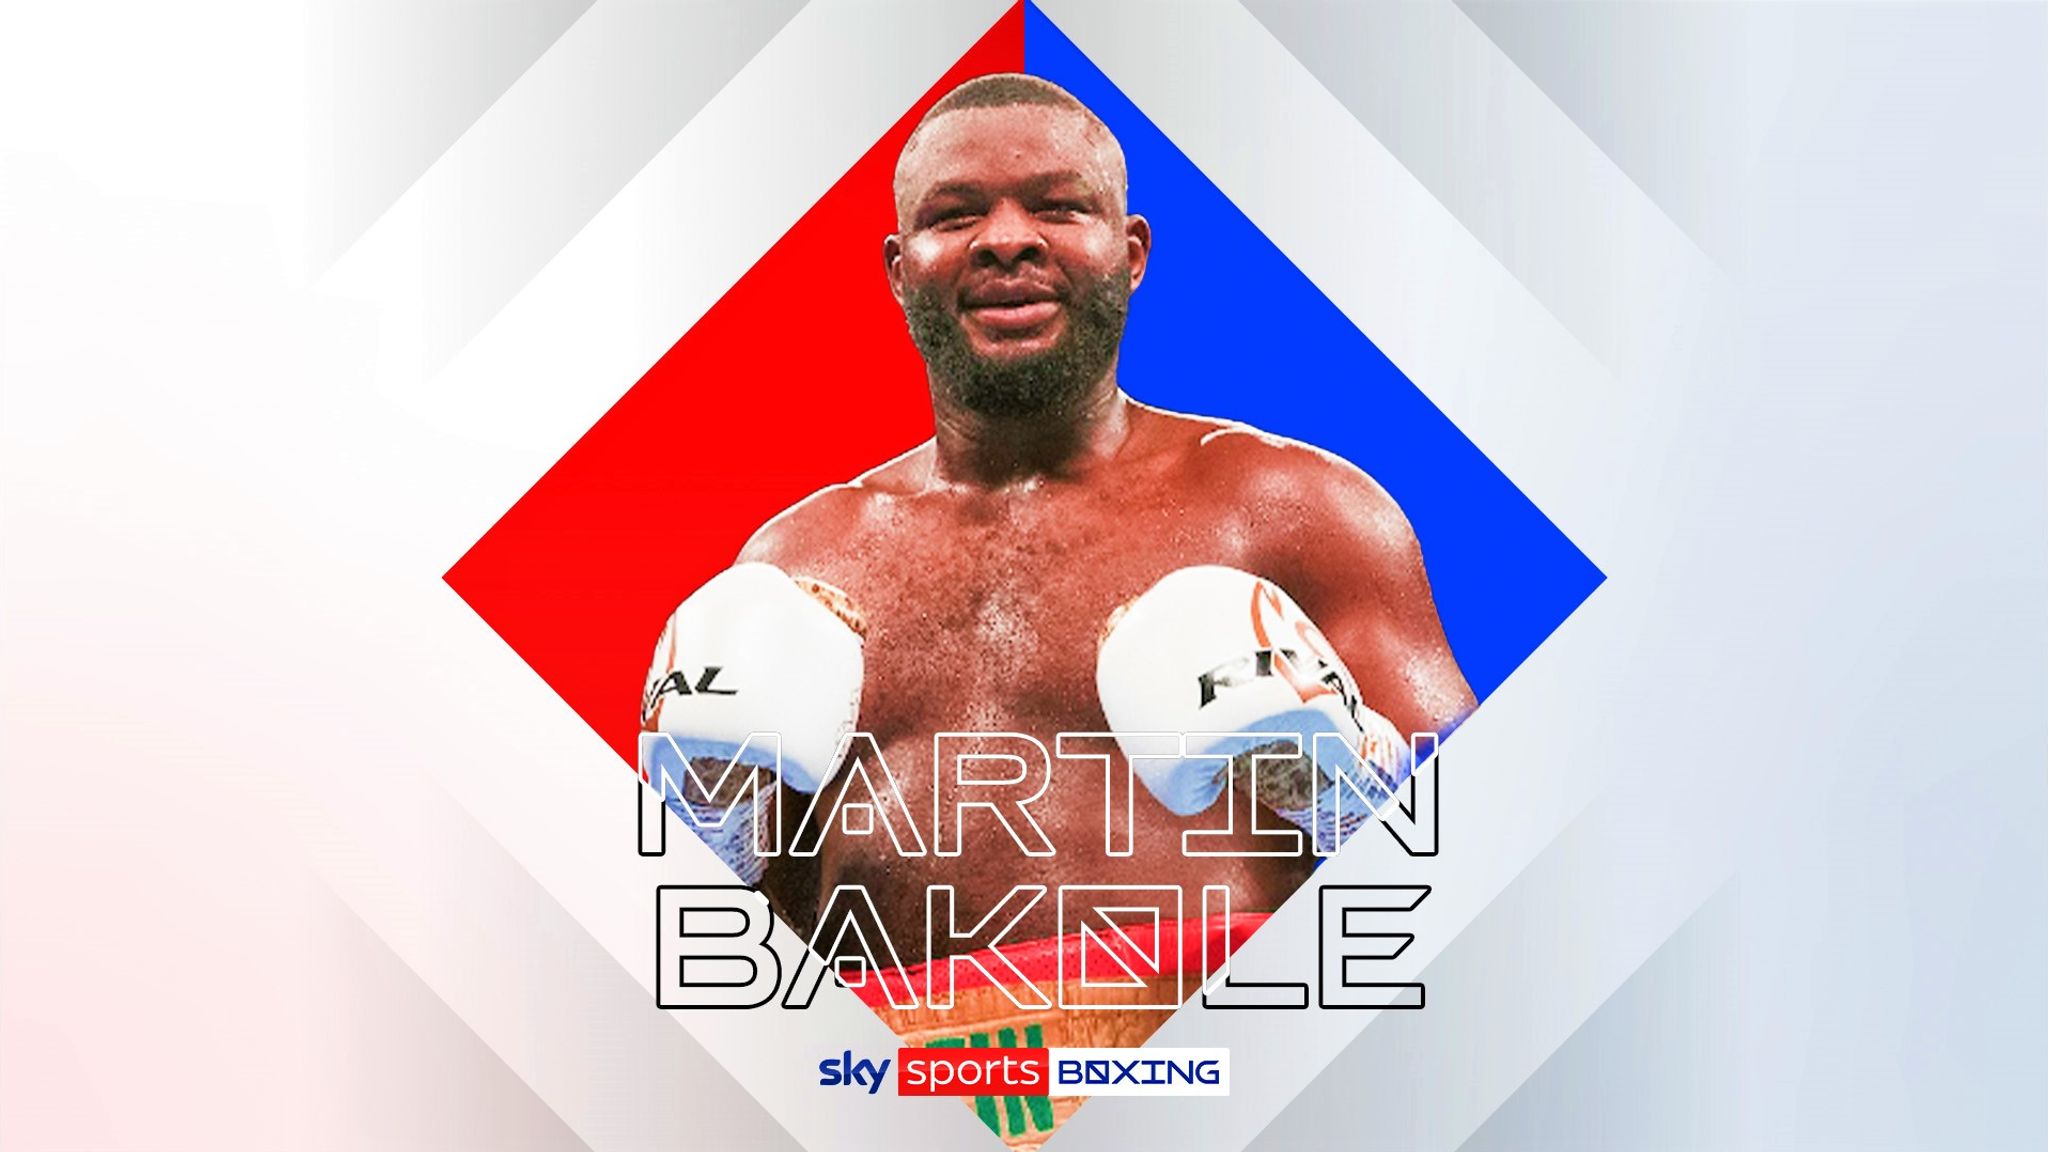 Martin Bakole signs multi-fight deal with BOXXER and hopes to secure world heavyweight title shot Boxing News Sky Sports